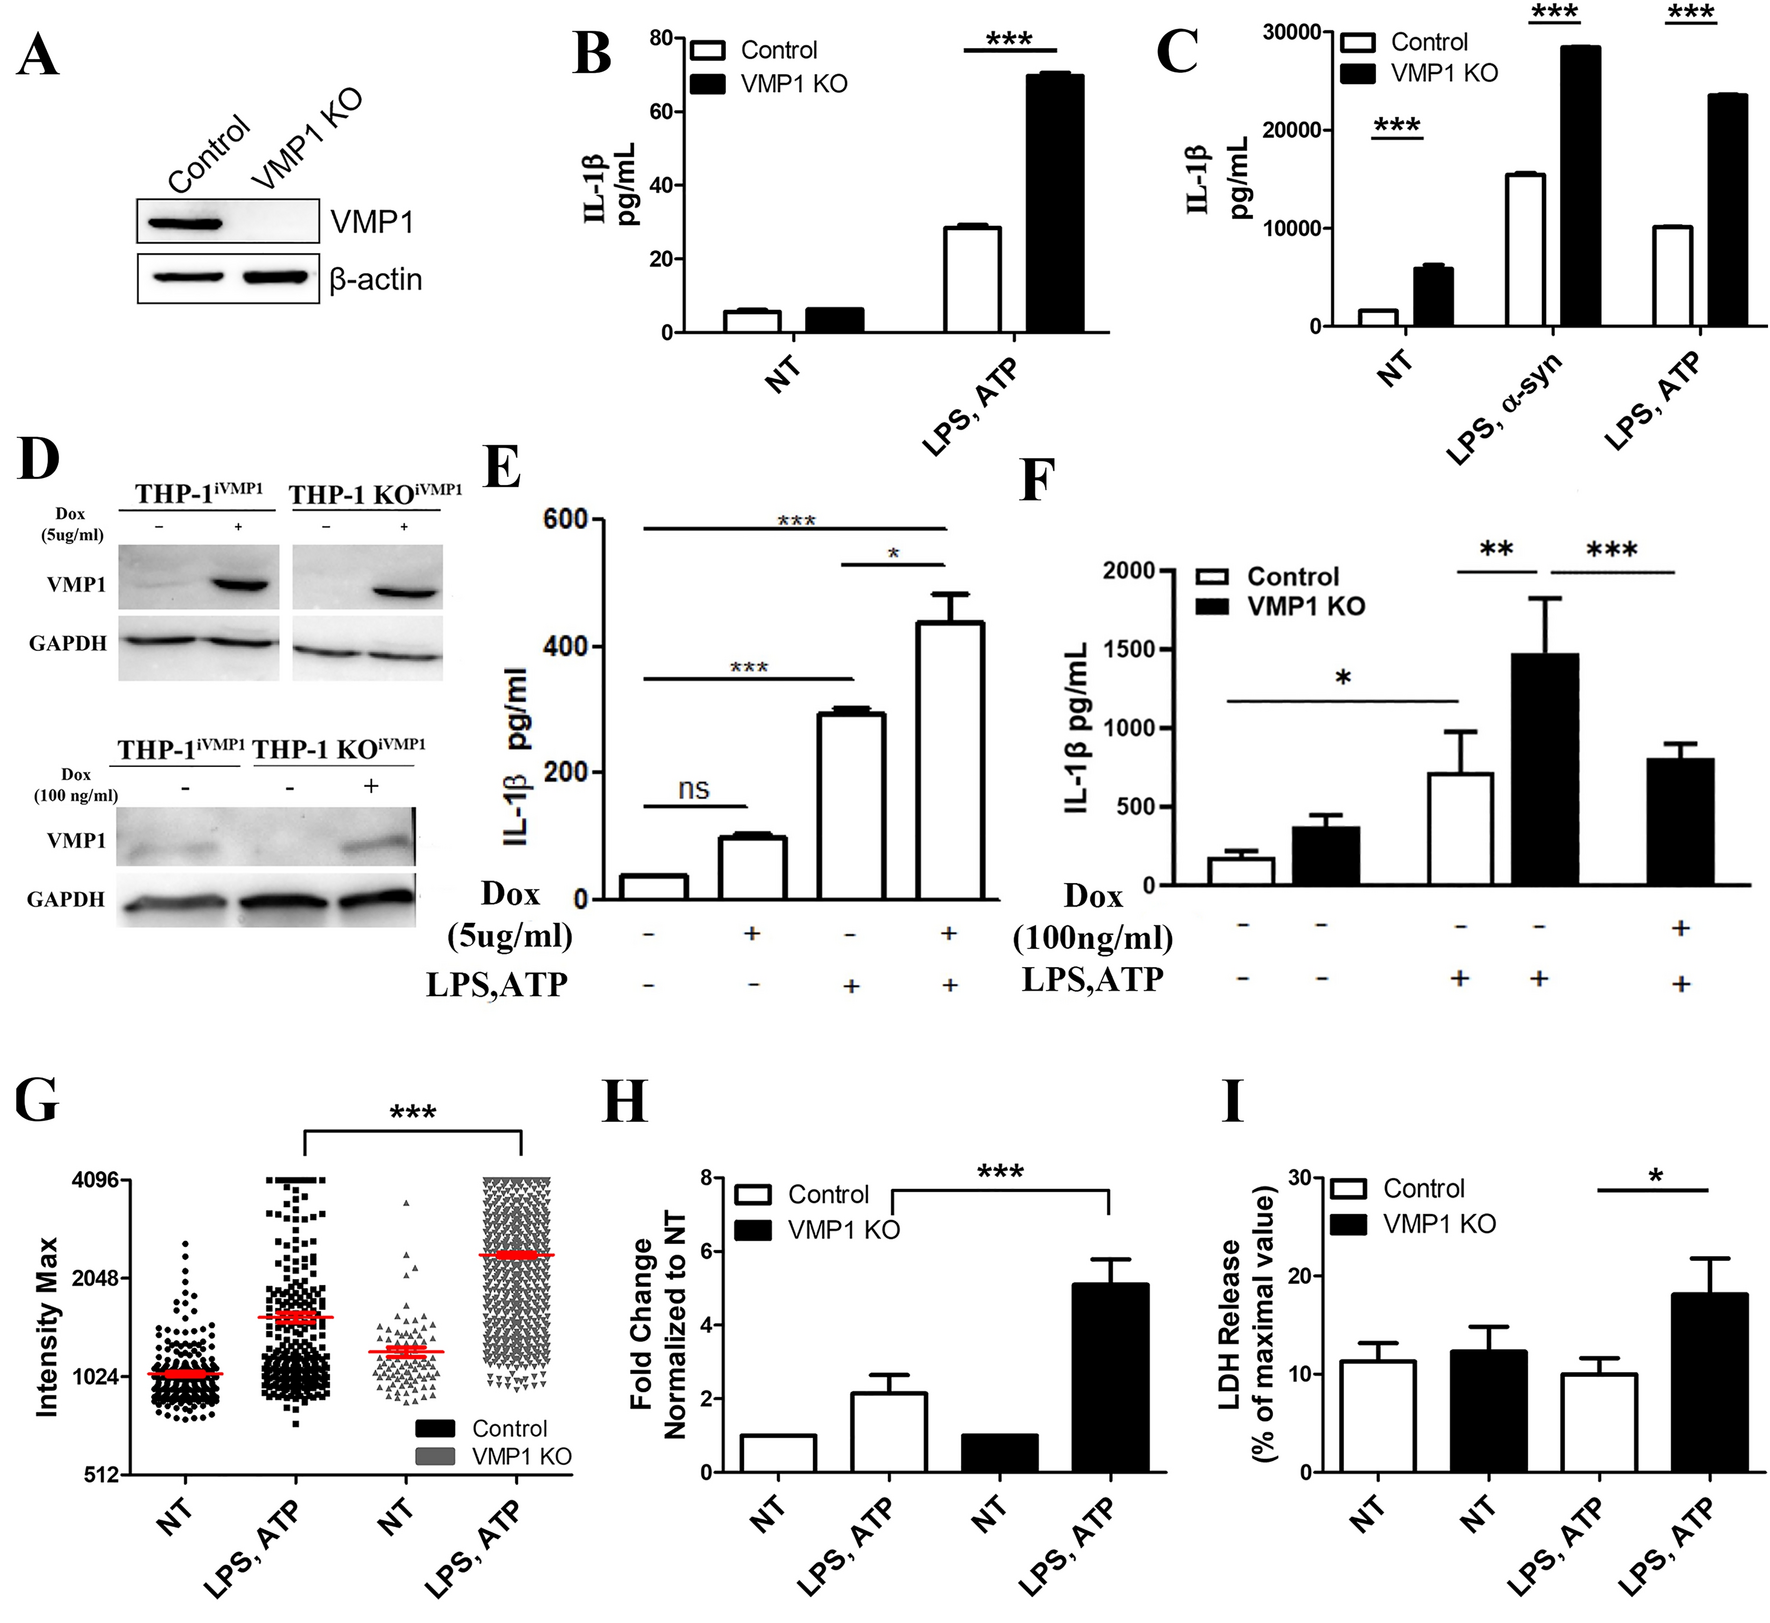 Altered vacuole membrane protein 1 (VMP1) expression is associated with increased NLRP3 inflammasome activation and mitochondrial dysfunction